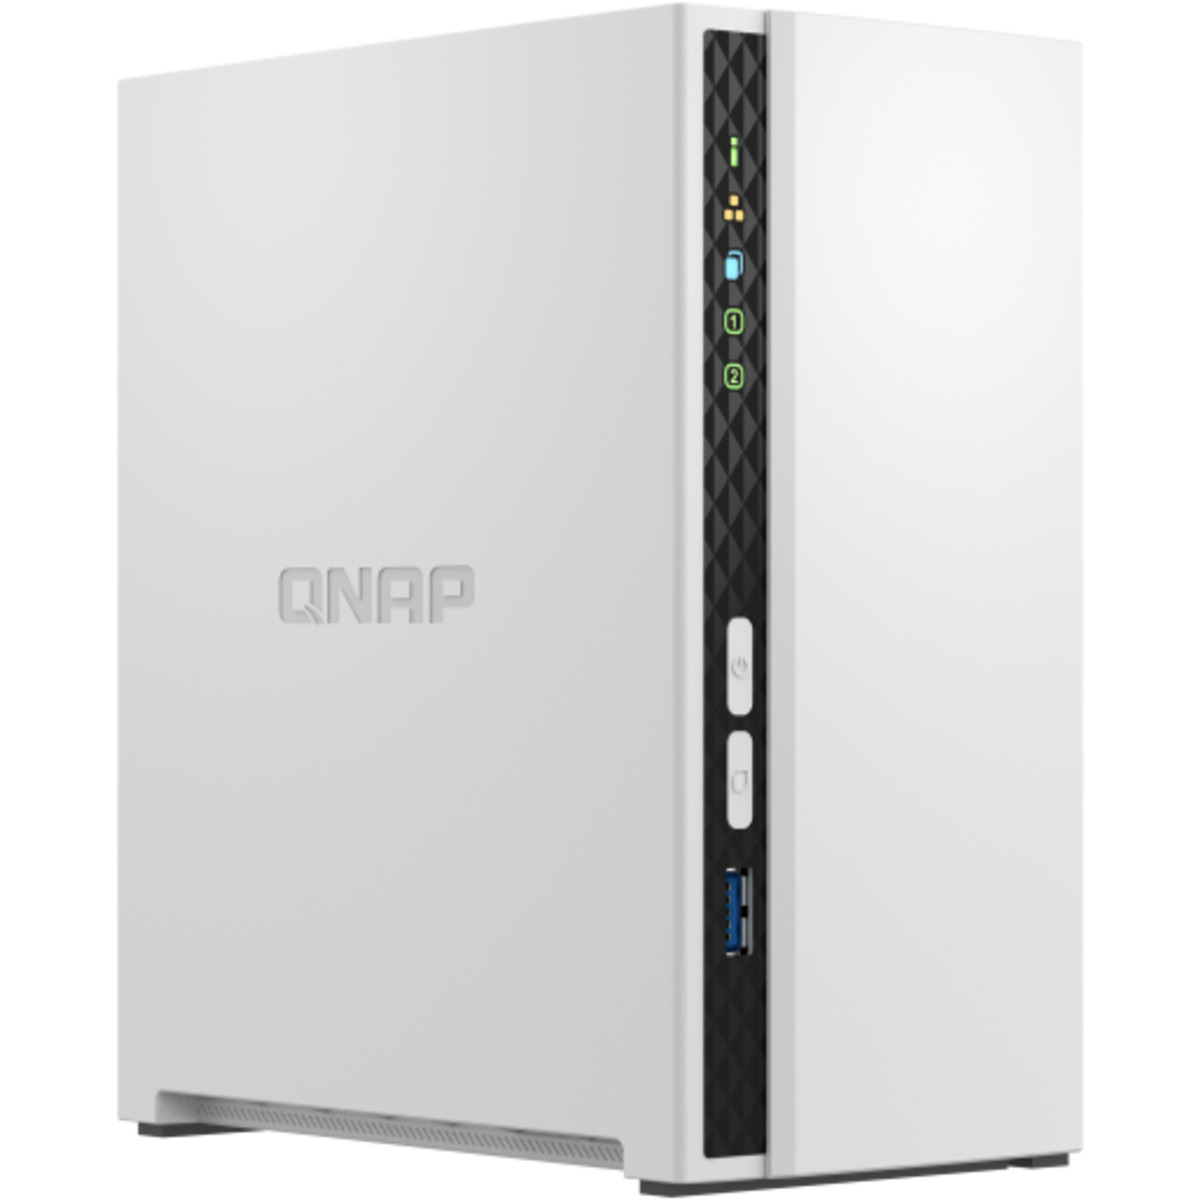 buy $828 QNAP TS-233 24tb Desktop NAS - Network Attached Storage Device 2x12000gb Seagate IronWolf Pro ST12000NT001 3.5 7200rpm SATA 6Gb/s HDD NAS Class Drives Installed - Burn-In Tested - nas headquarters buy network attached storage server device das new raid-5 free shipping simply usa TS-233